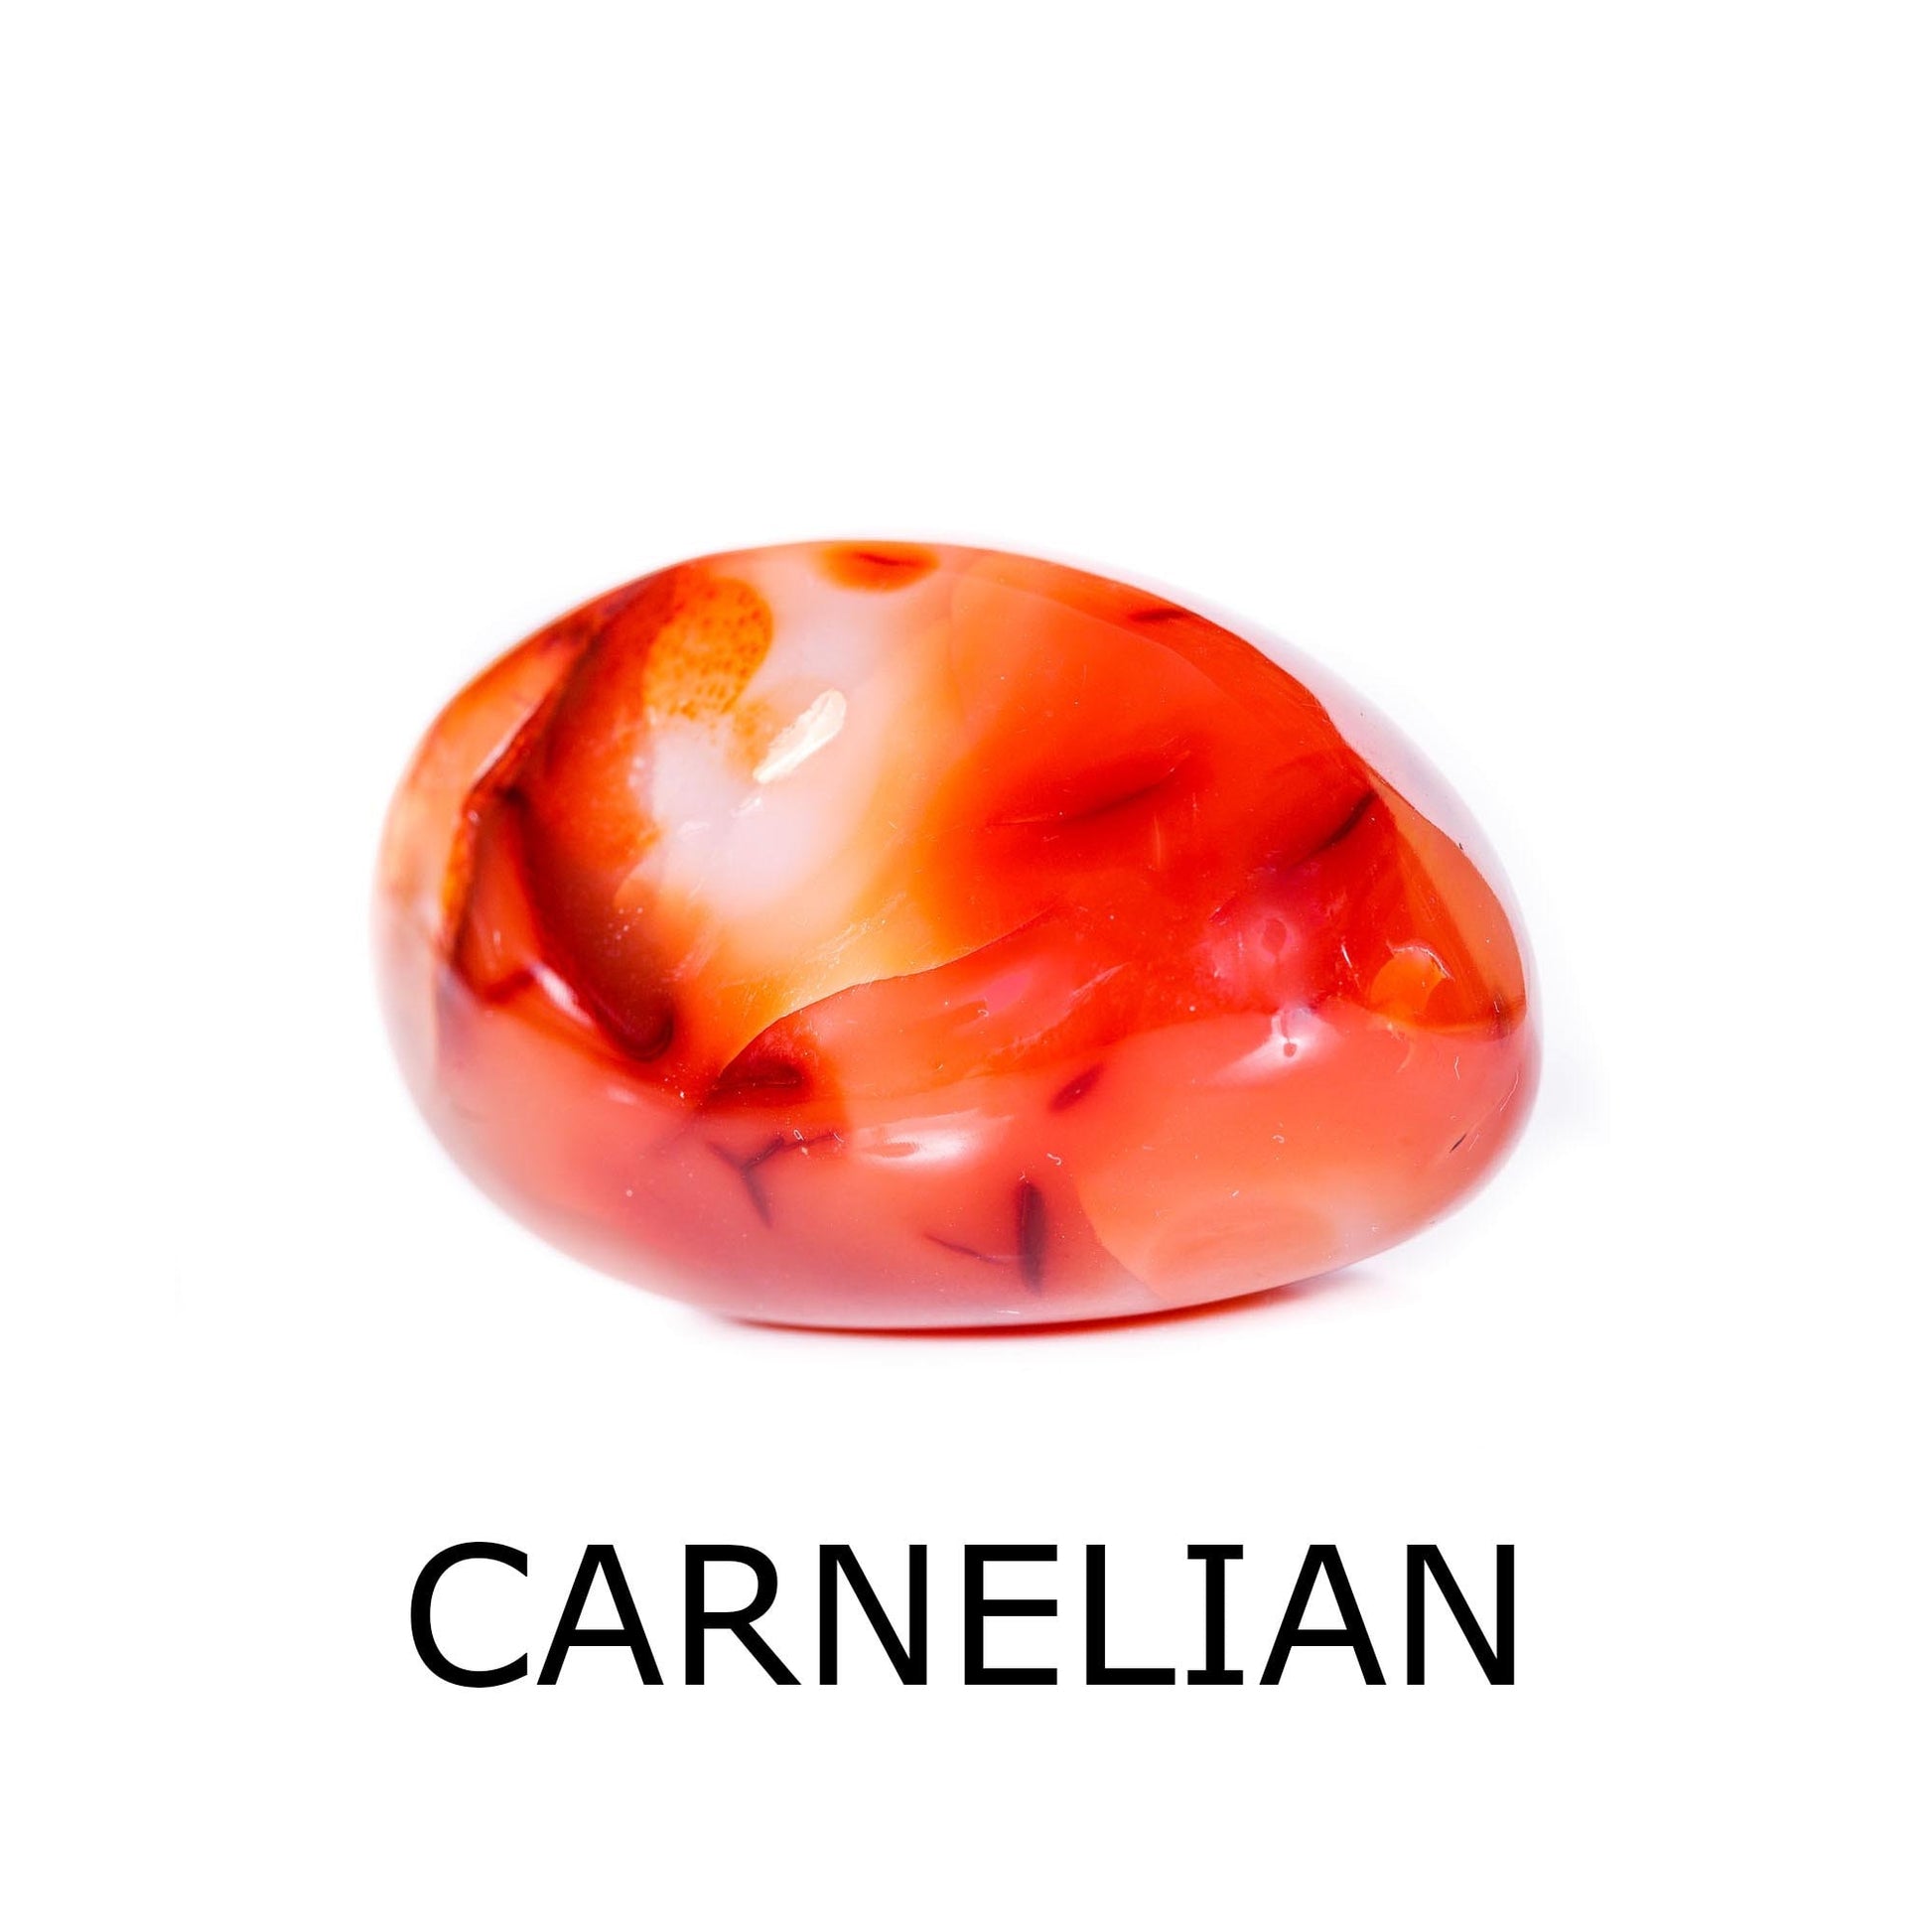 red carnelian tumbled stone with label